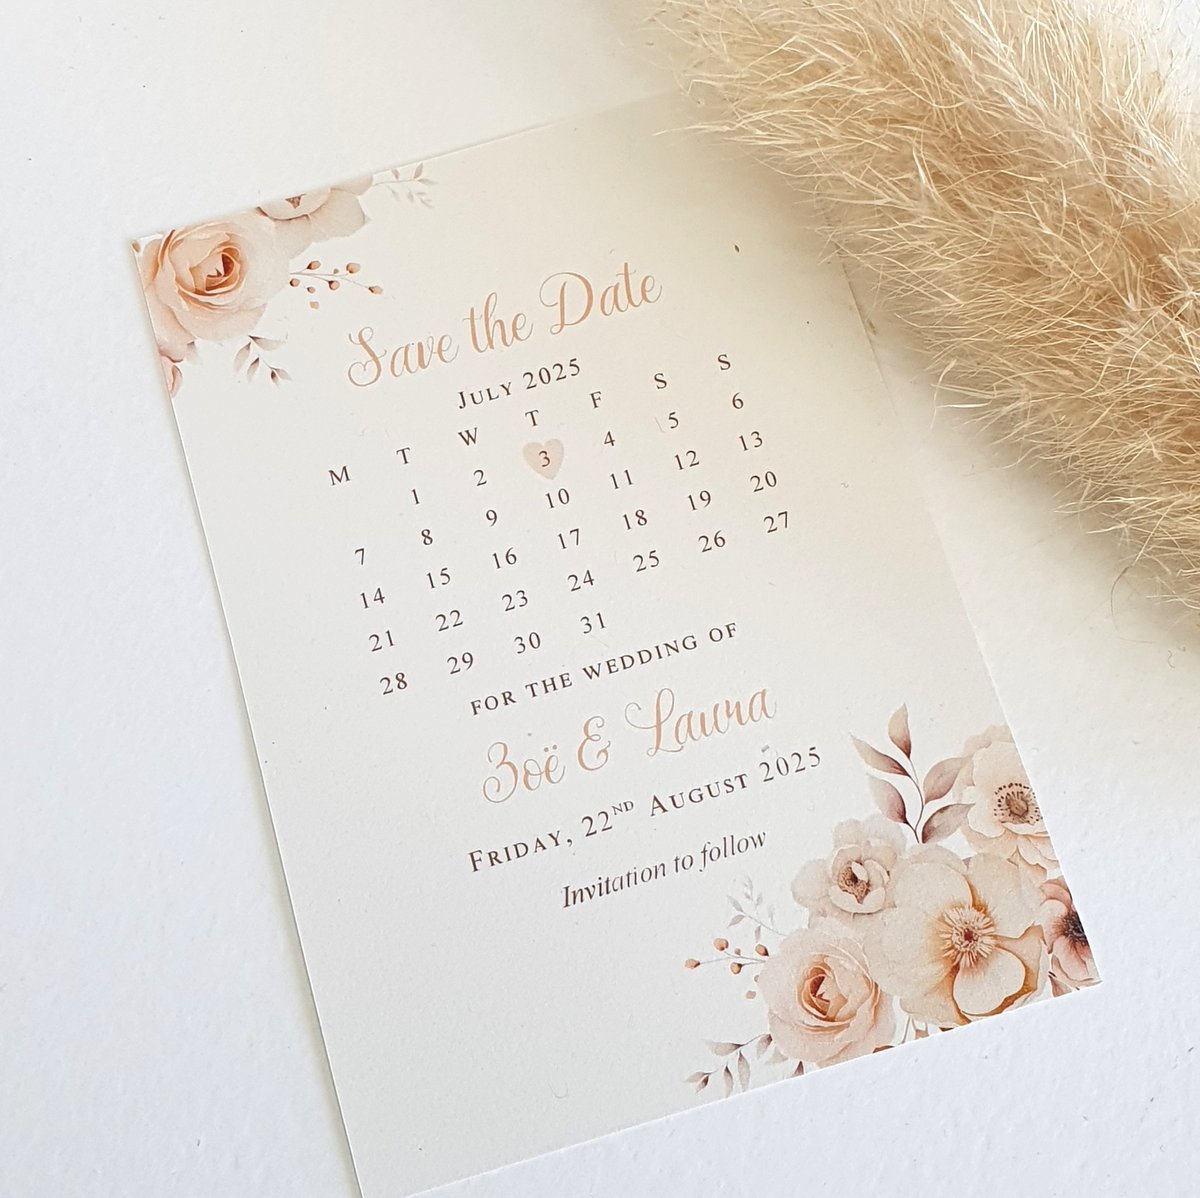 a wedding save the date card with a calendar showing the wedding date. Champagne floral design to the corners